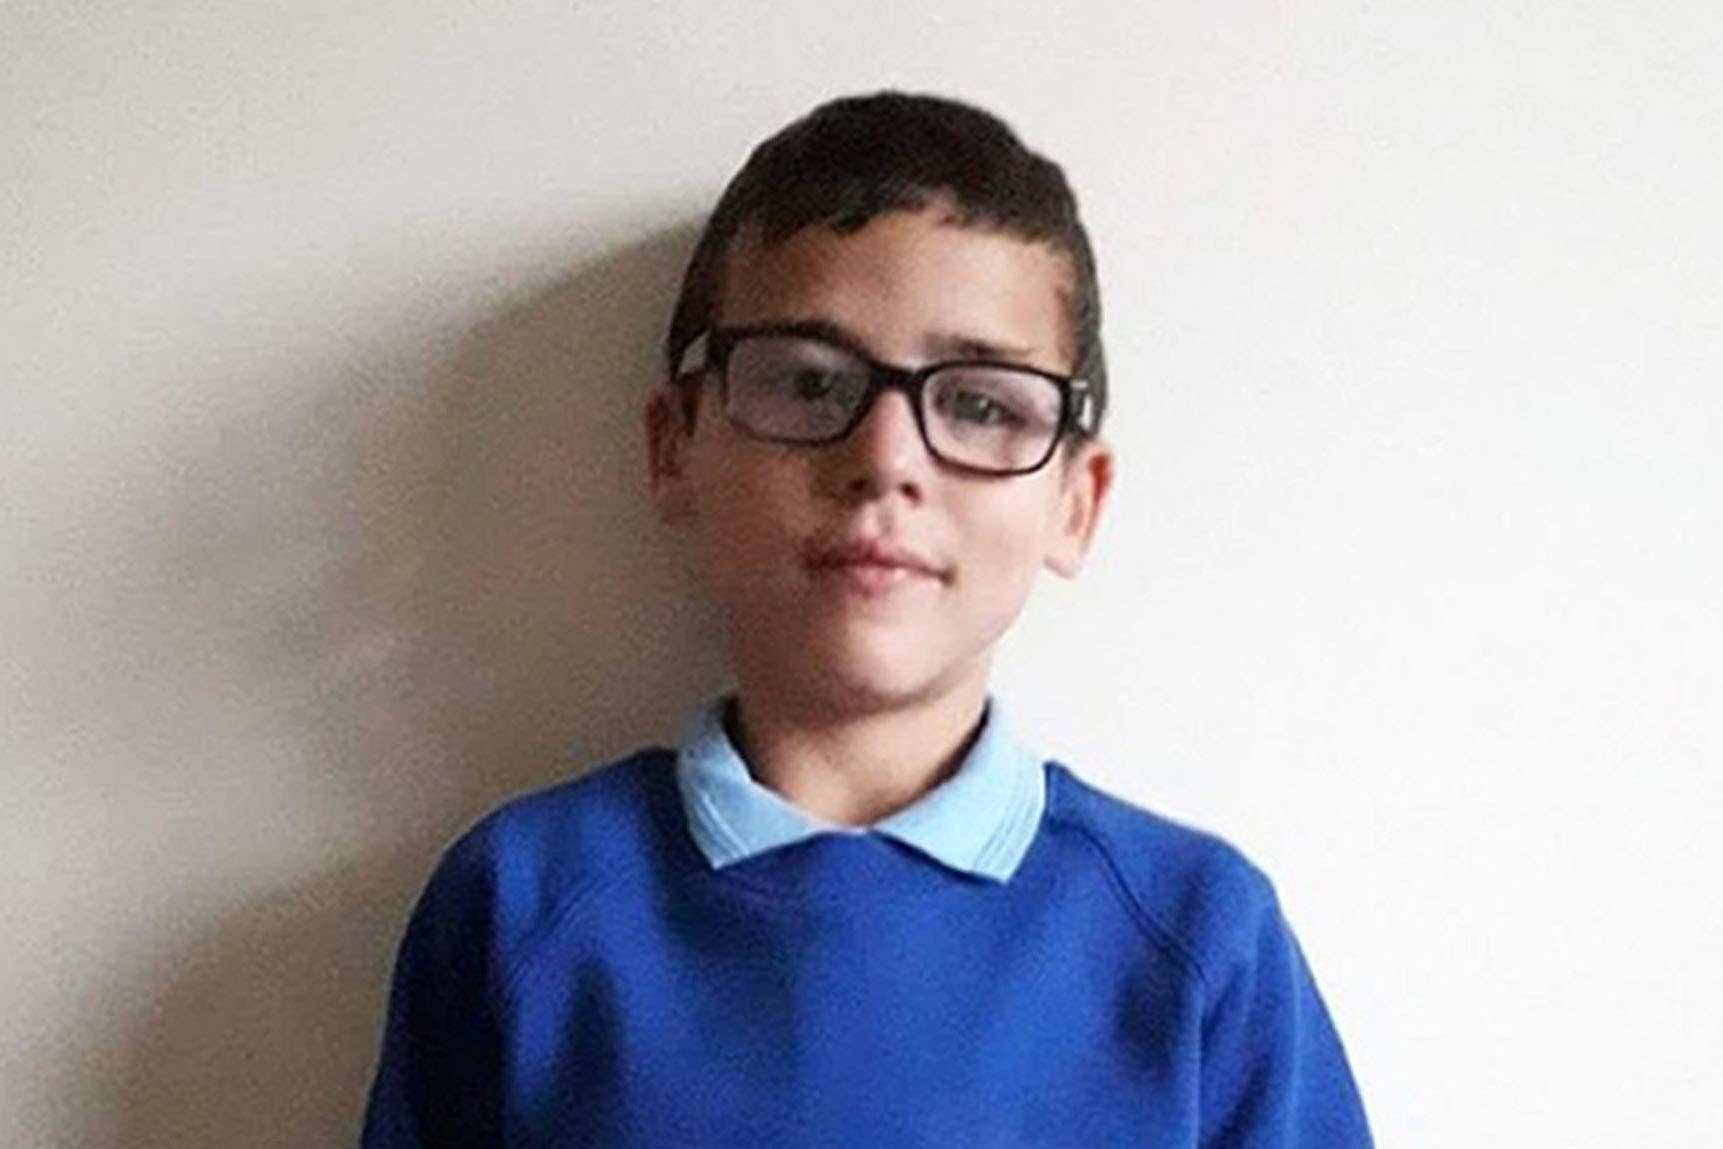 Alfie Steele who was found fatally collapsed at home in Droitwich, Worcestershire, in February 2021 (West Mercia Police/PA)